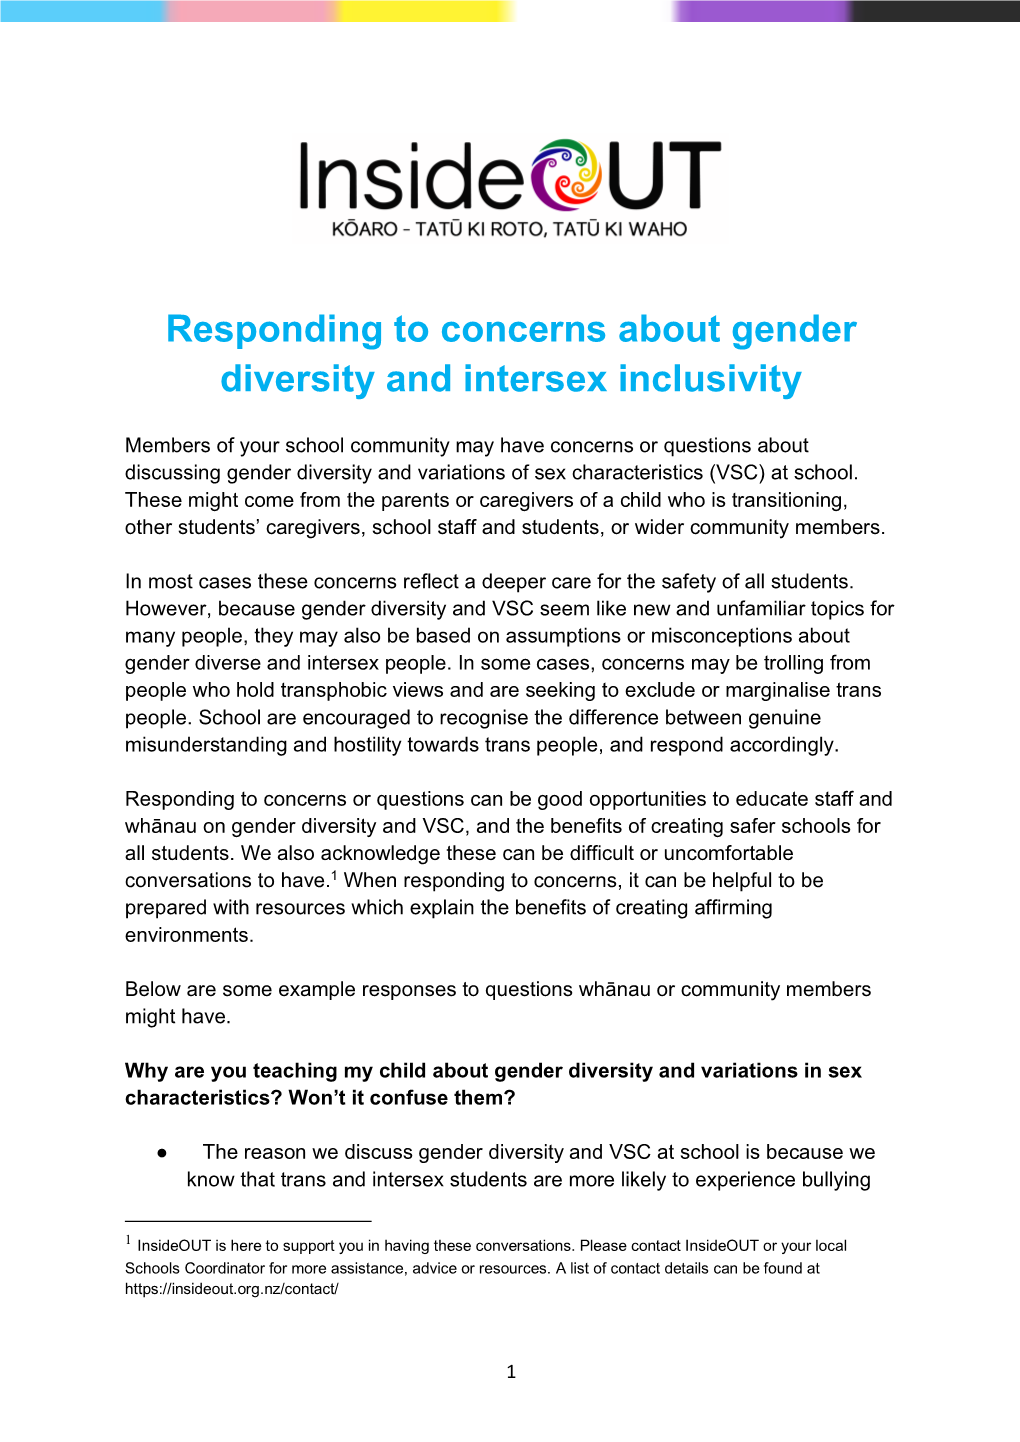 Responding to Concerns About Gender Diversity and Intersex Inclusivity